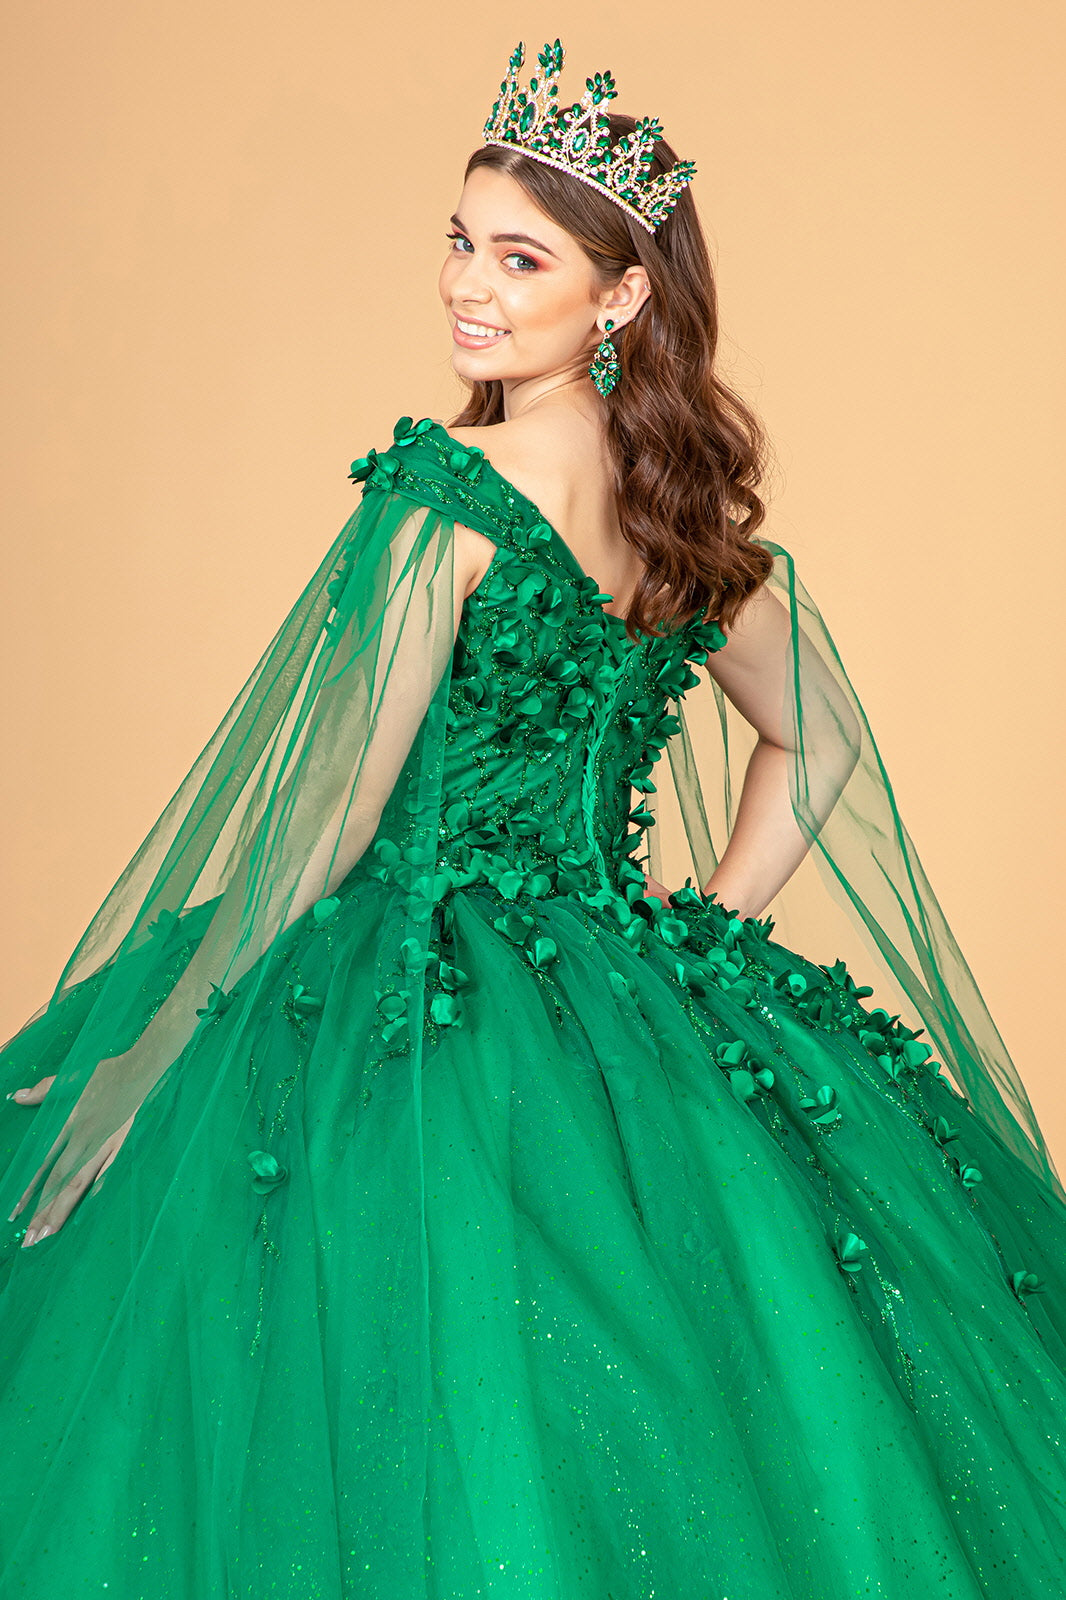 Quinceanera Sweet 16 Long Mesh Gown - The Dress Outlet Emerald Green